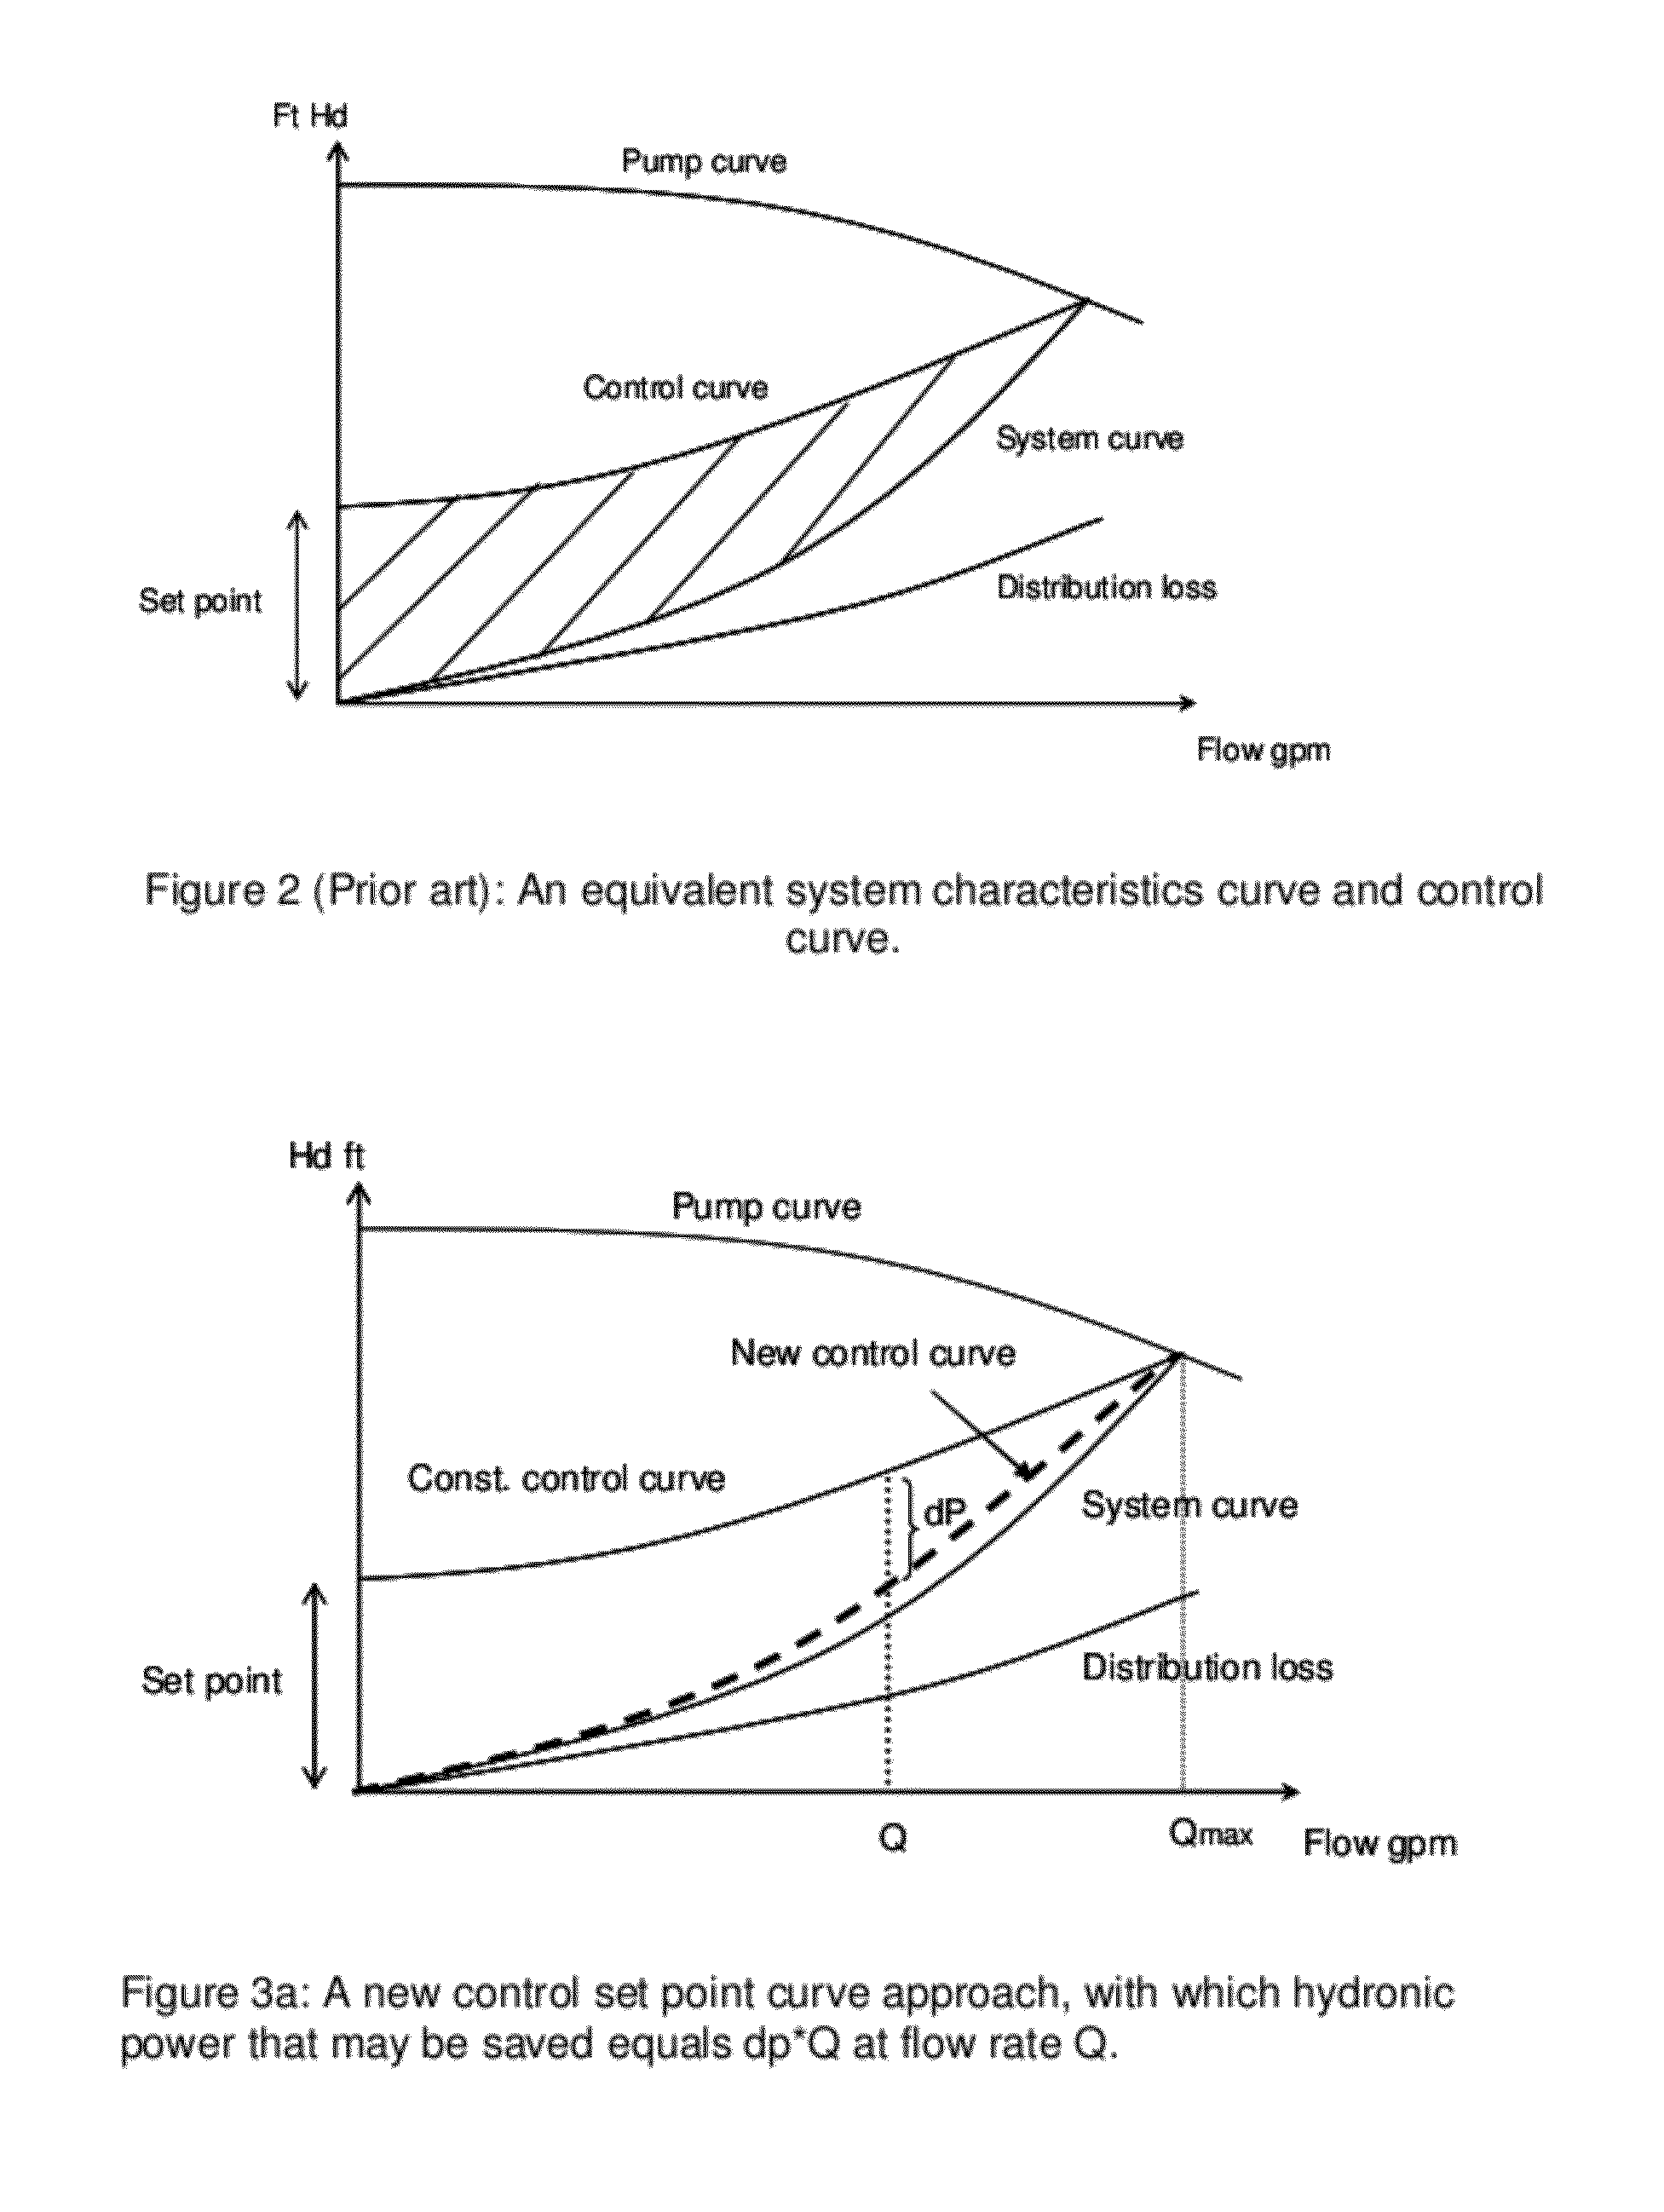 Method and Apparatus for Pump Control Using Varying Equivalent System Characteristic Curve, AKA an Adaptive Control Curve